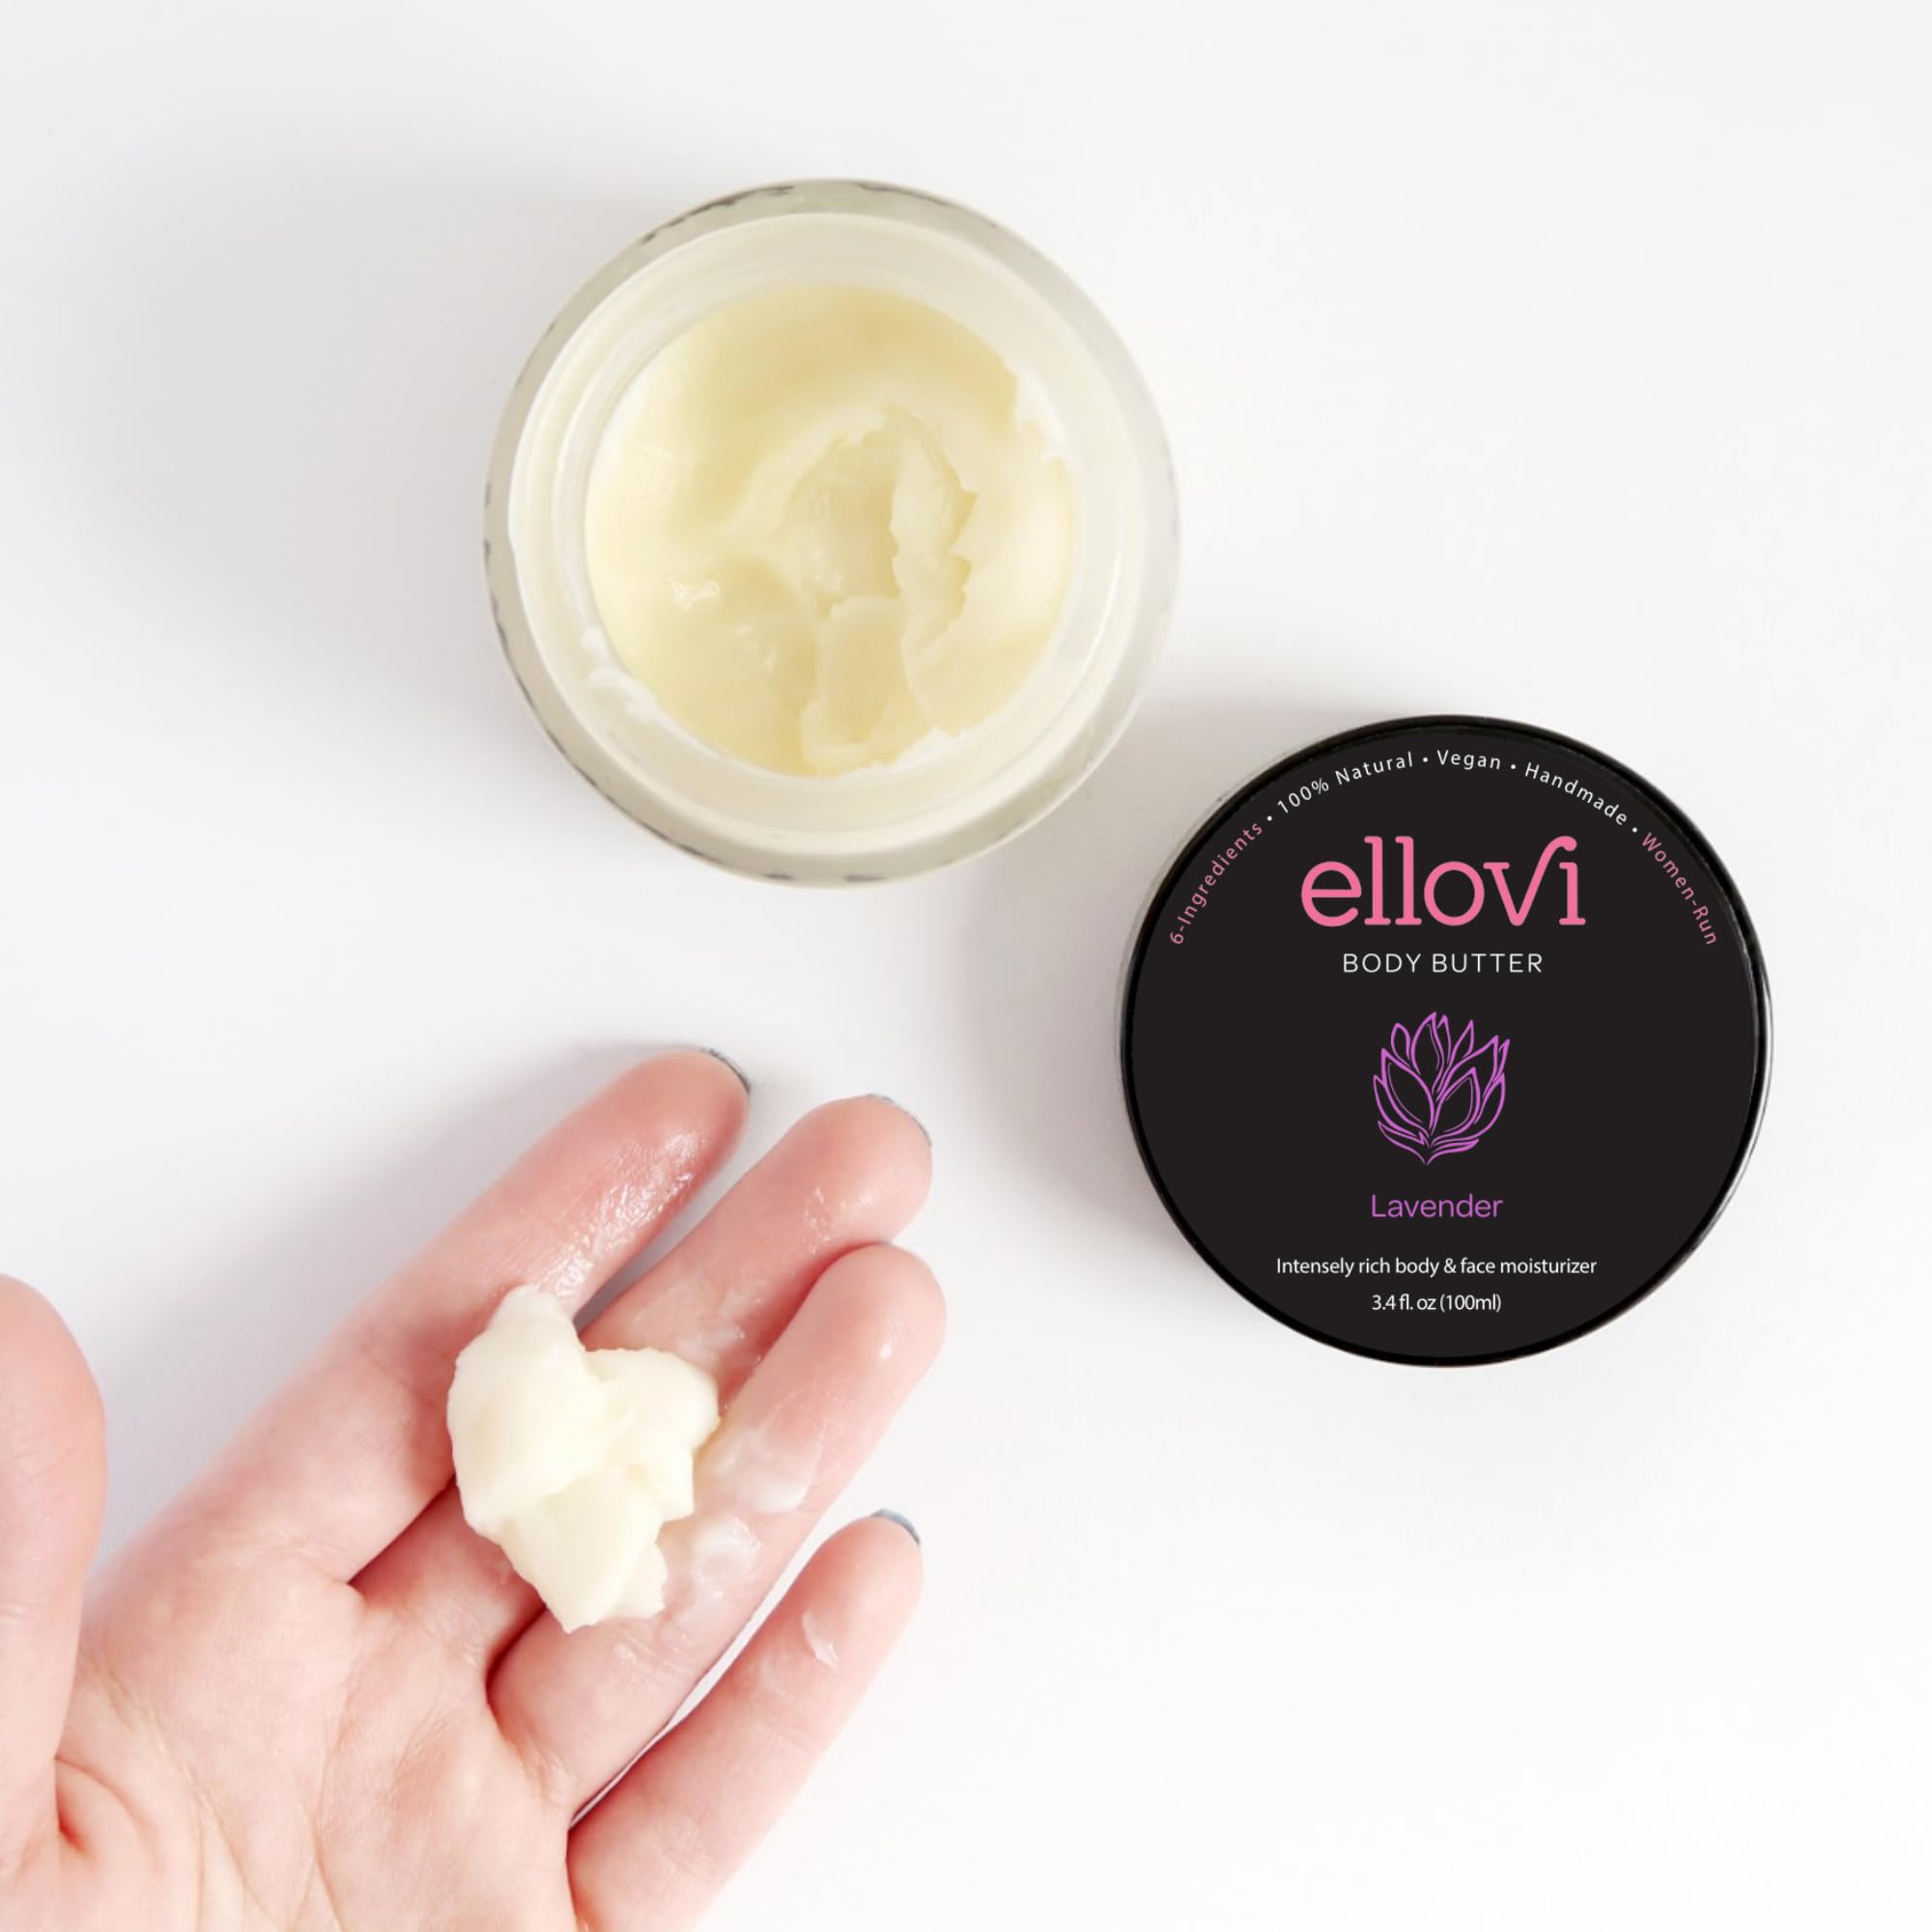 Ellovi All-Natural Body Butter - Lavender - Pure Enough to Eat - Made With Just 6 Vegan Ingredients - Ultra-Rich 100% Plant-Based Hydrating Moisturizer For Naturally Healthy Skin (3.4 fl. oz/100ml)